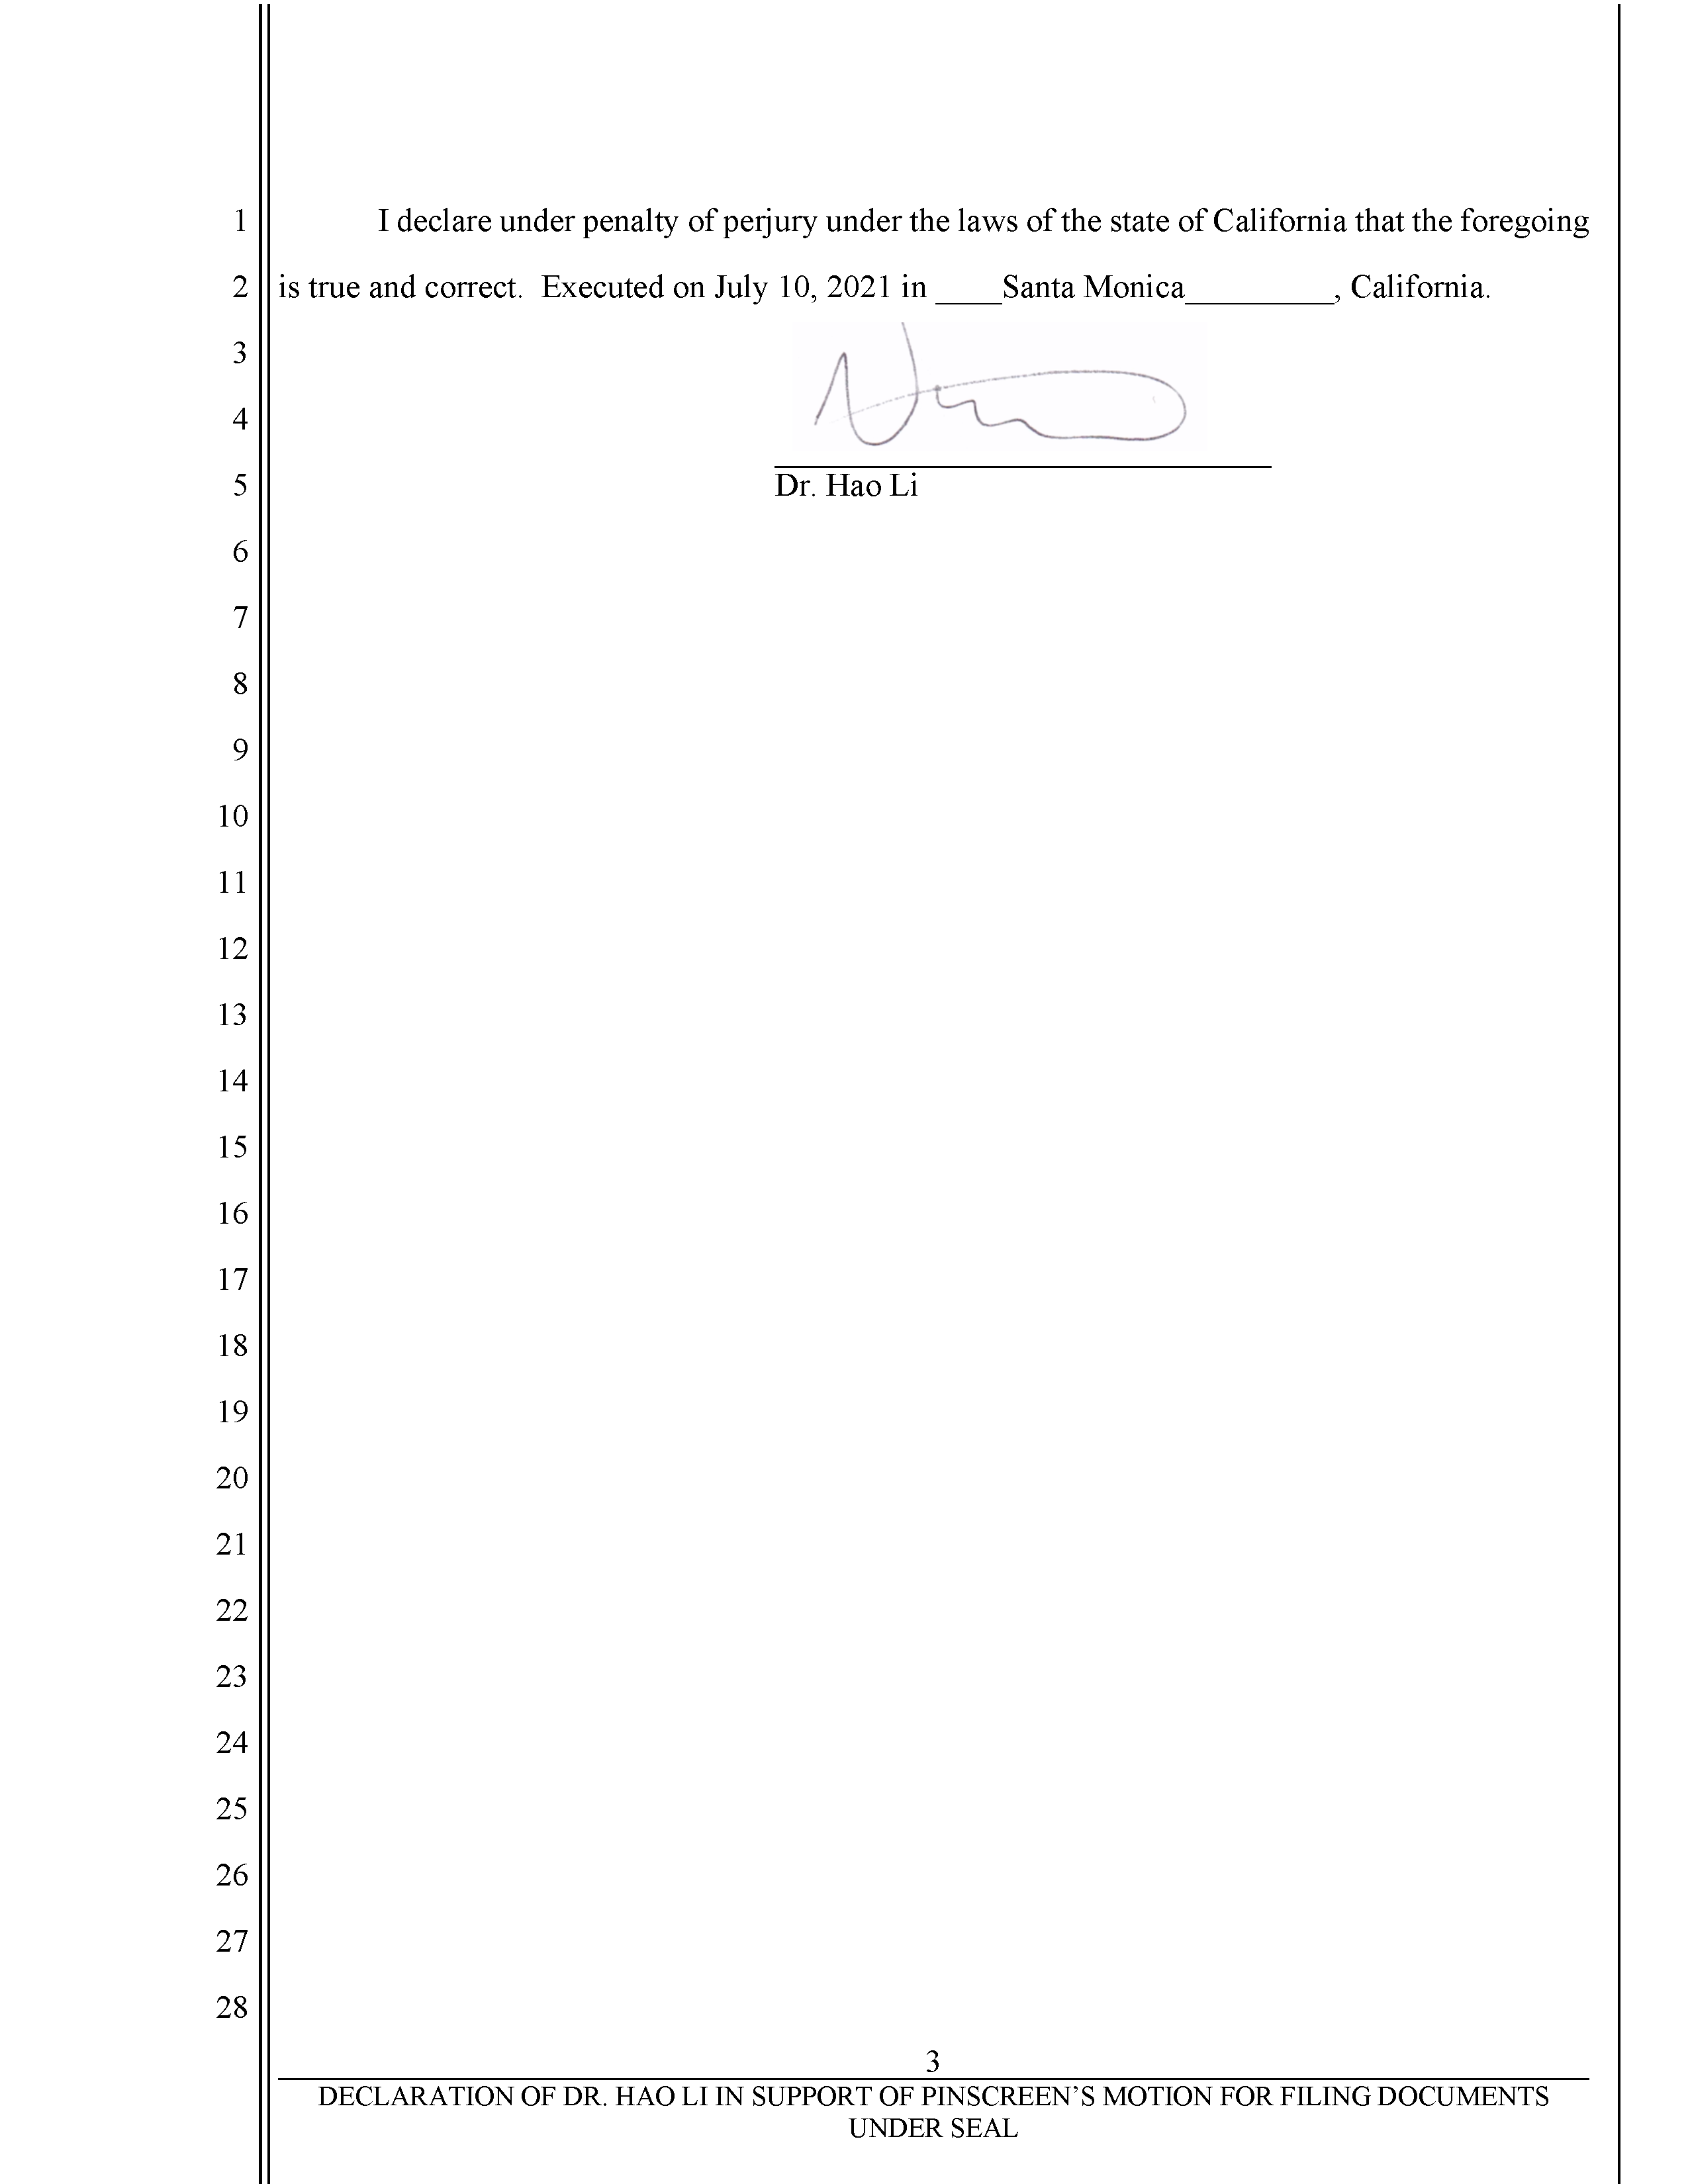 Pinscreen’s Motion to Seal USC’s Investigation of Hao Li’s Scientific Misconduct Page 64